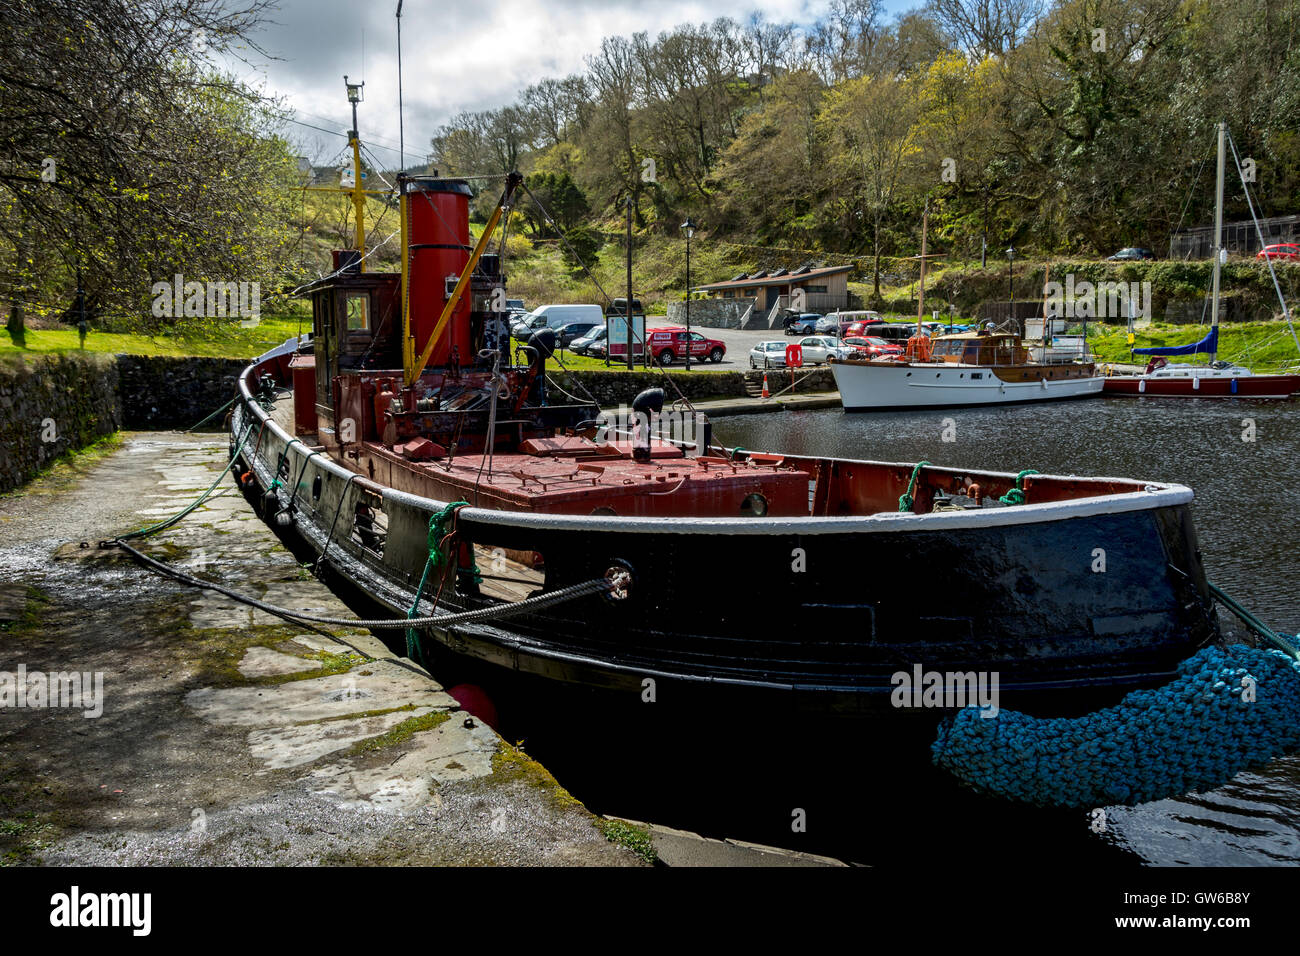 Vintage tug boat the Duke of Normandy II moored in the Crinan basin on the Crinan Canal at Crinan, Argyll and Bute, Scotland, UK Stock Photo